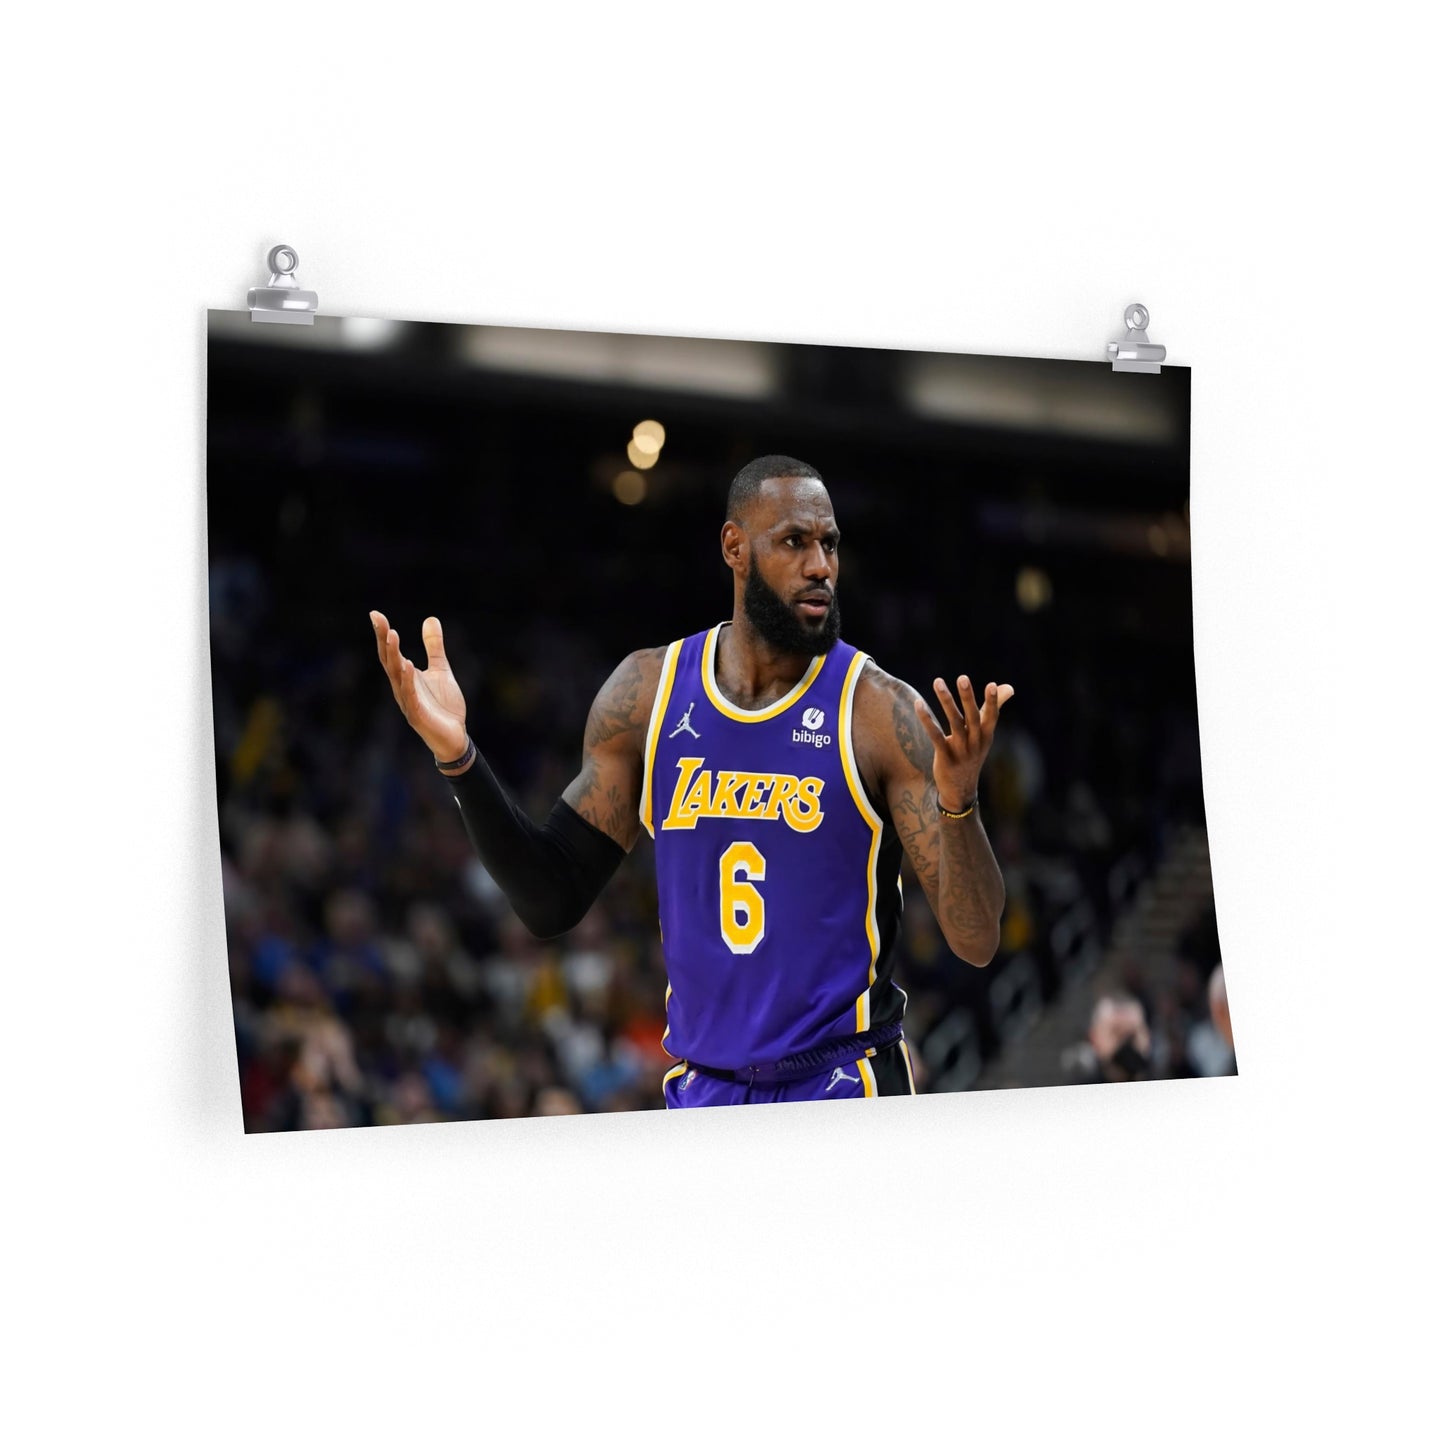 Lebron James Arms Questioning Gesture Los Angeles Lakers 6 Jersey Poster